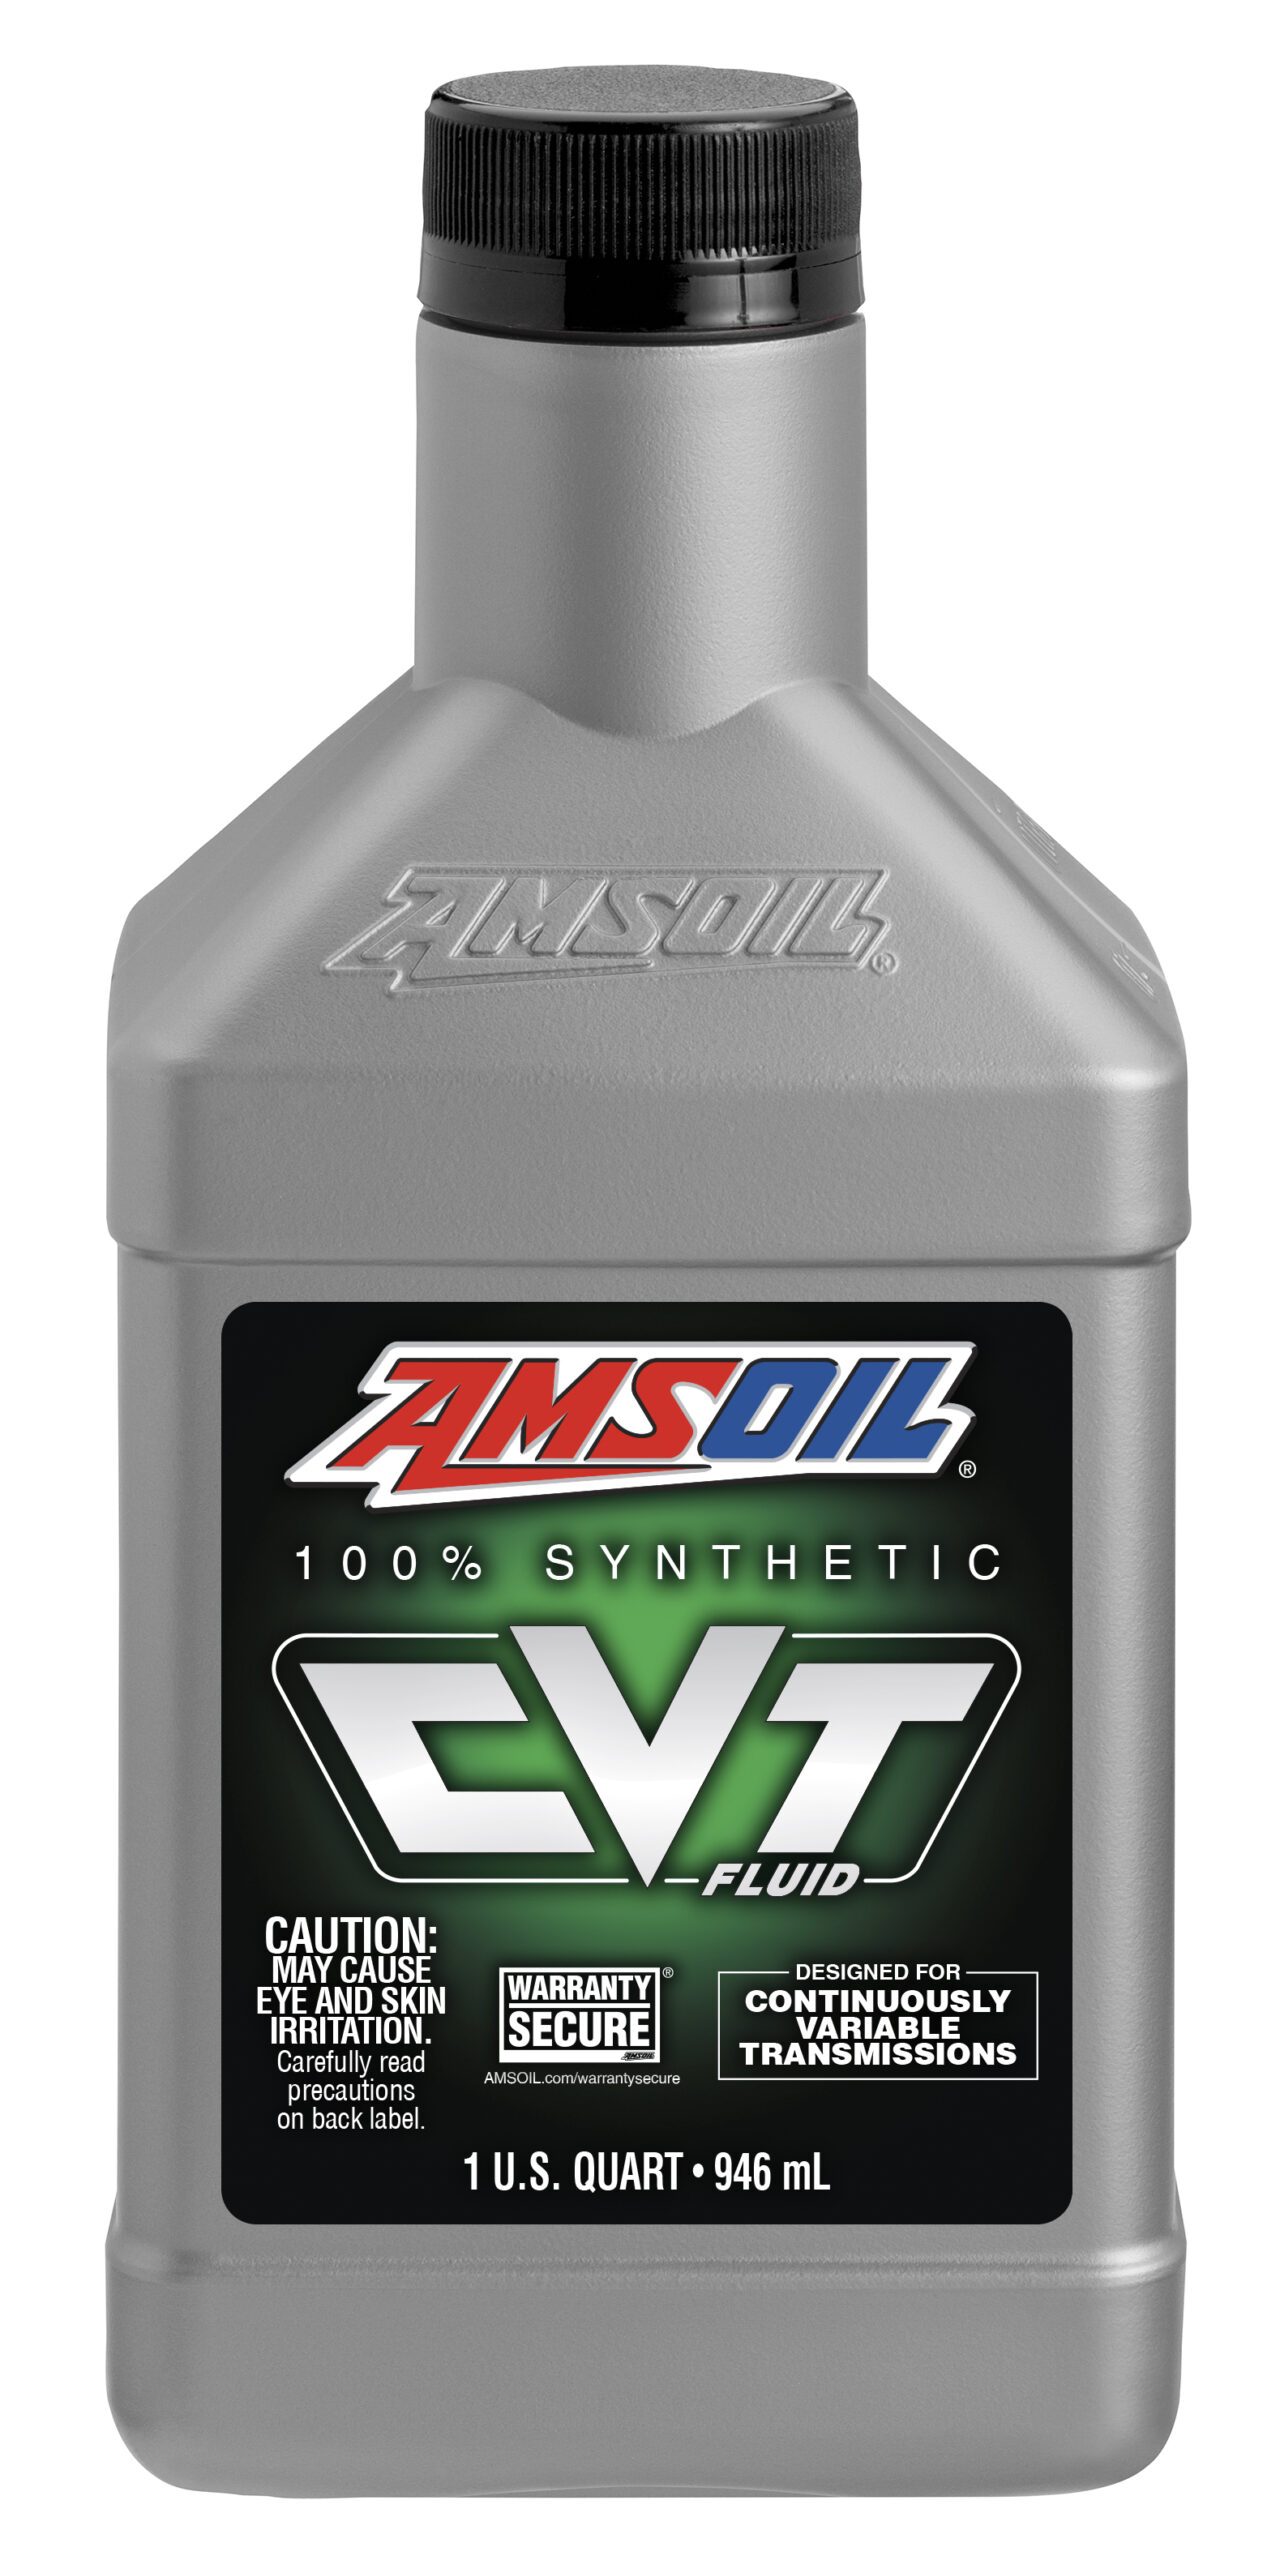 A bottle of AMSOIL Synthetic CVT Fluid, which provides outstanding metal-to-metal frictional properties and excellent protection and performance.